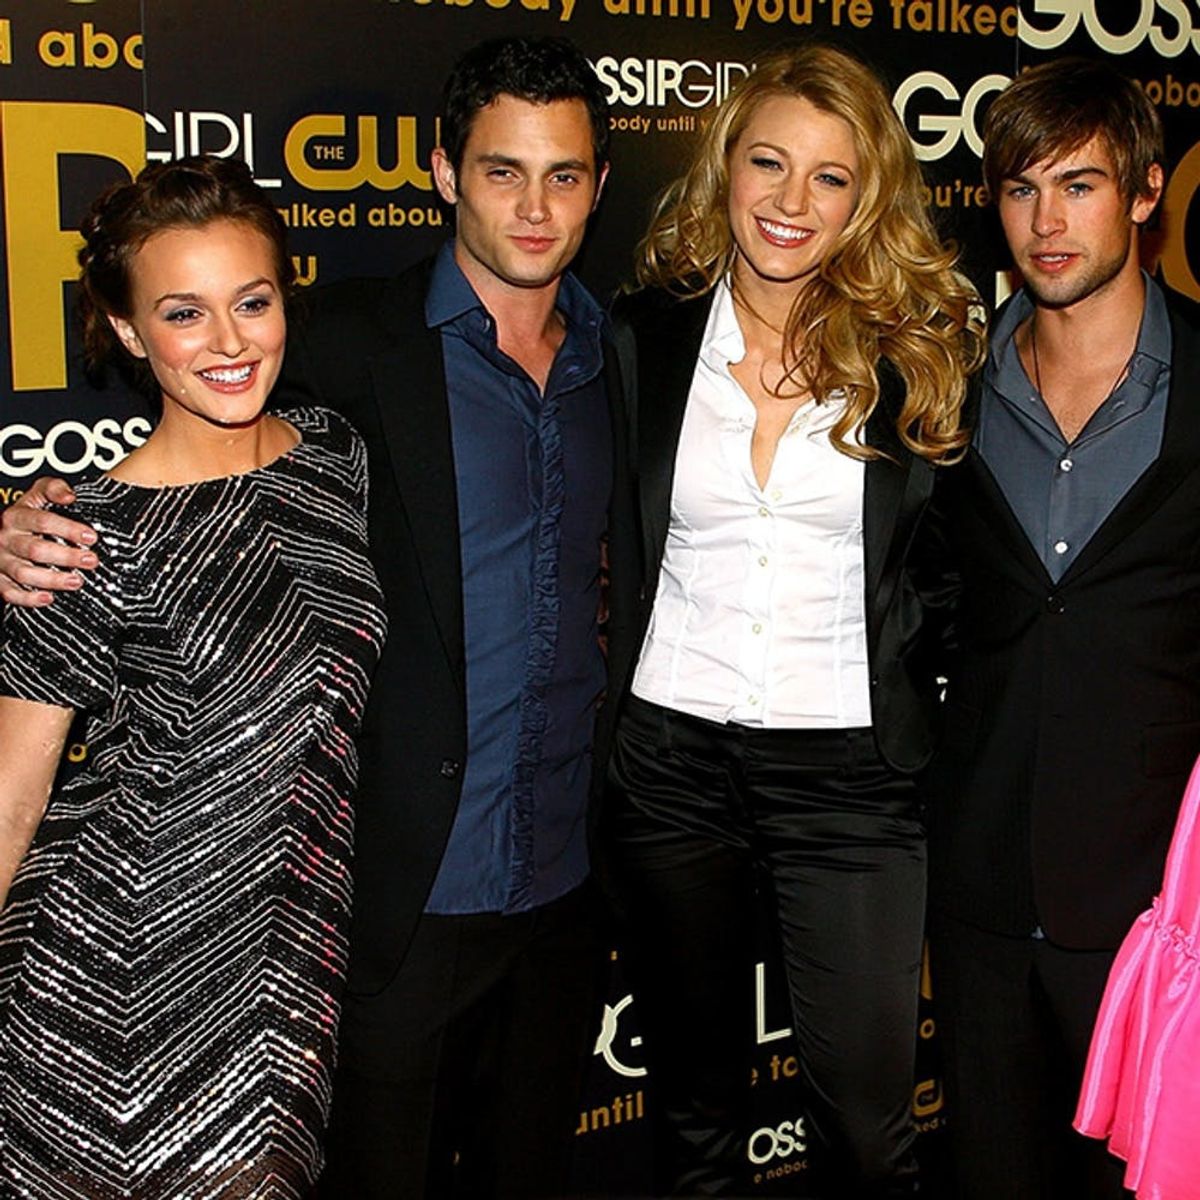 We Need to Talk About This Gossip Girl Reunion